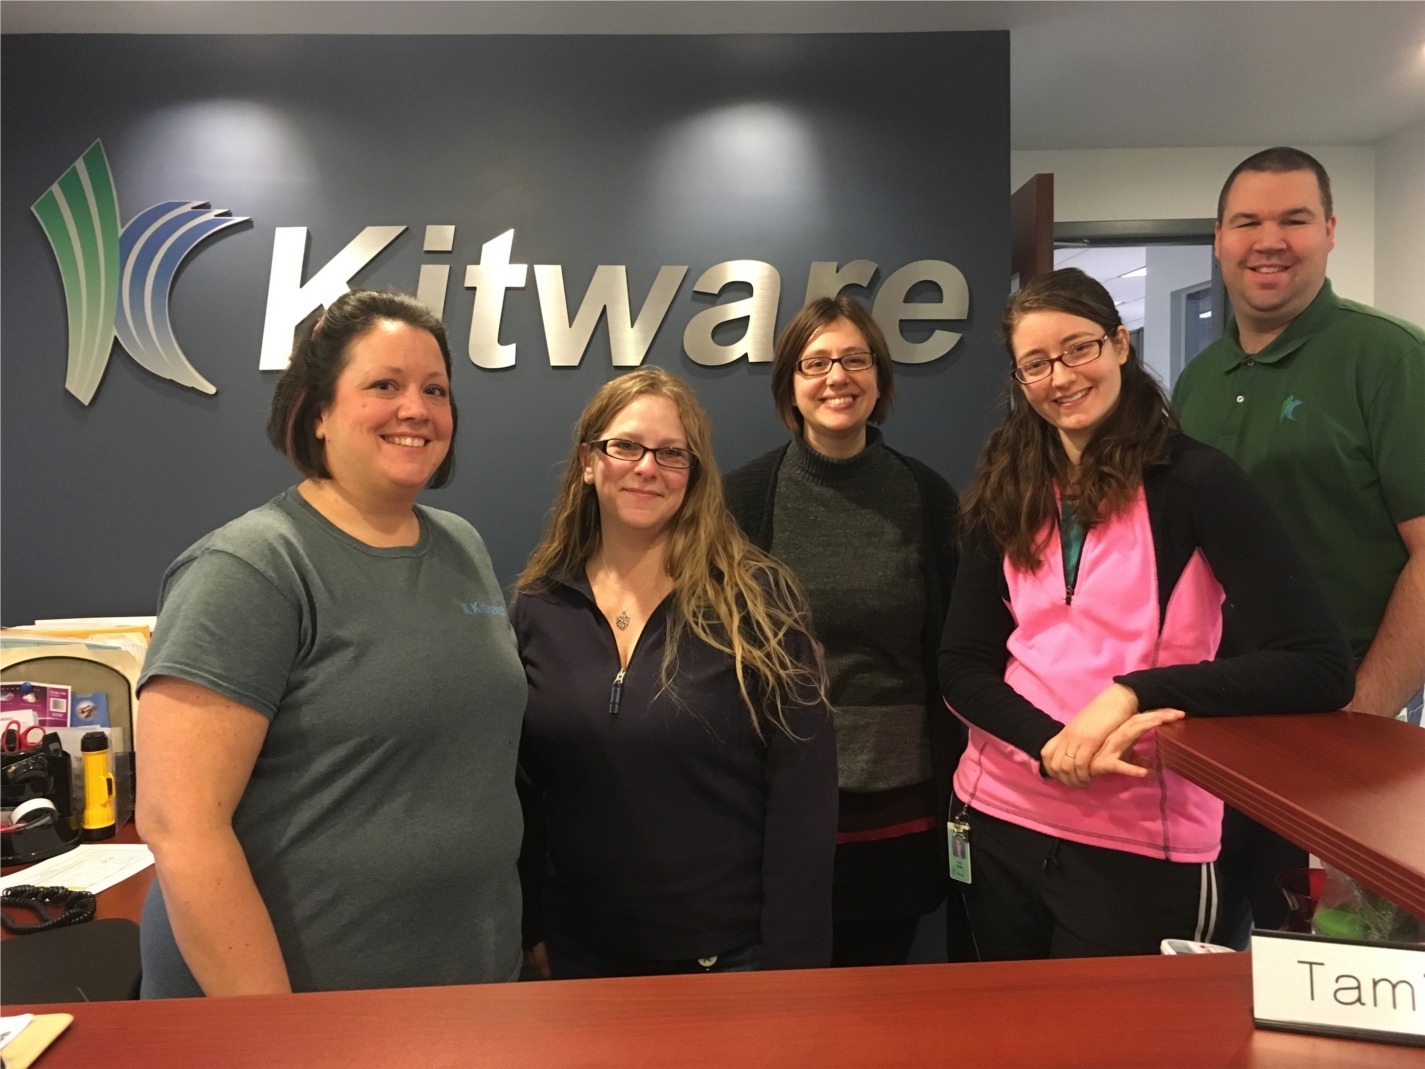 Kitware is headquartered in Clifton Park, NY, with offices in Carrboro, NC; Santa Fe, NM; and Lyon, France.